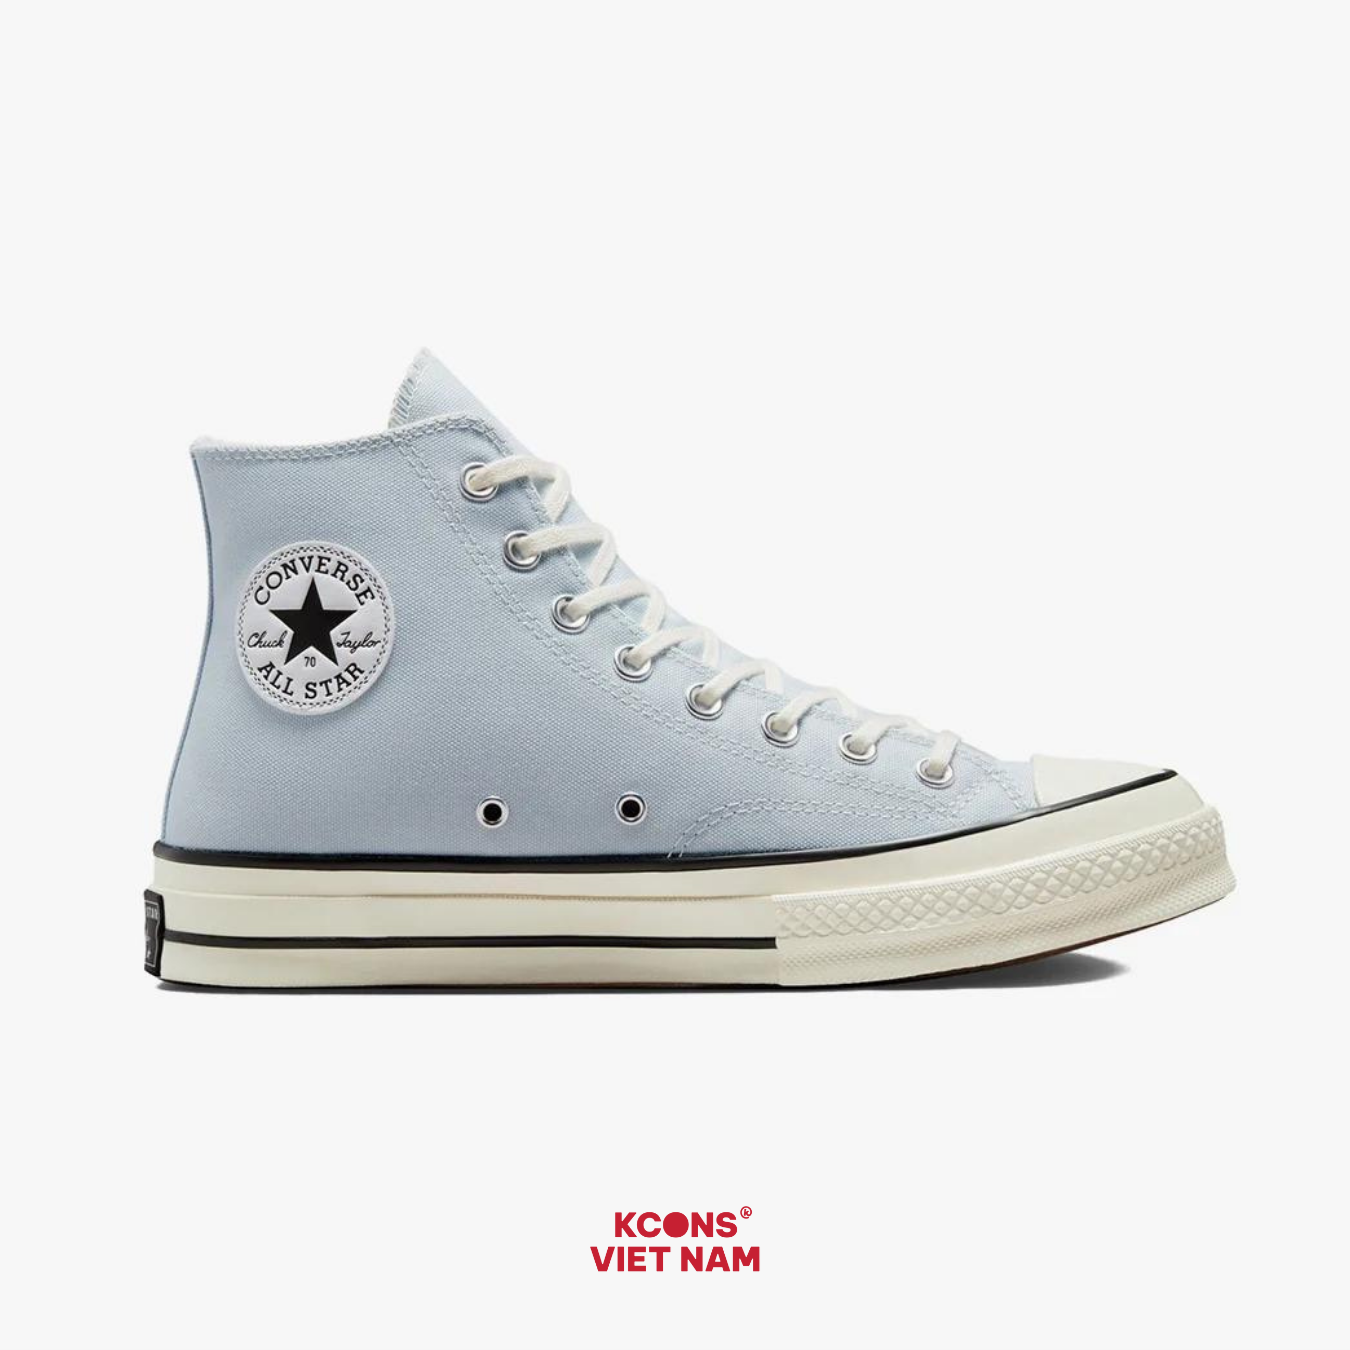  Giày Converse Chuck Taylor 1970 Ghosted High Top A03447C 